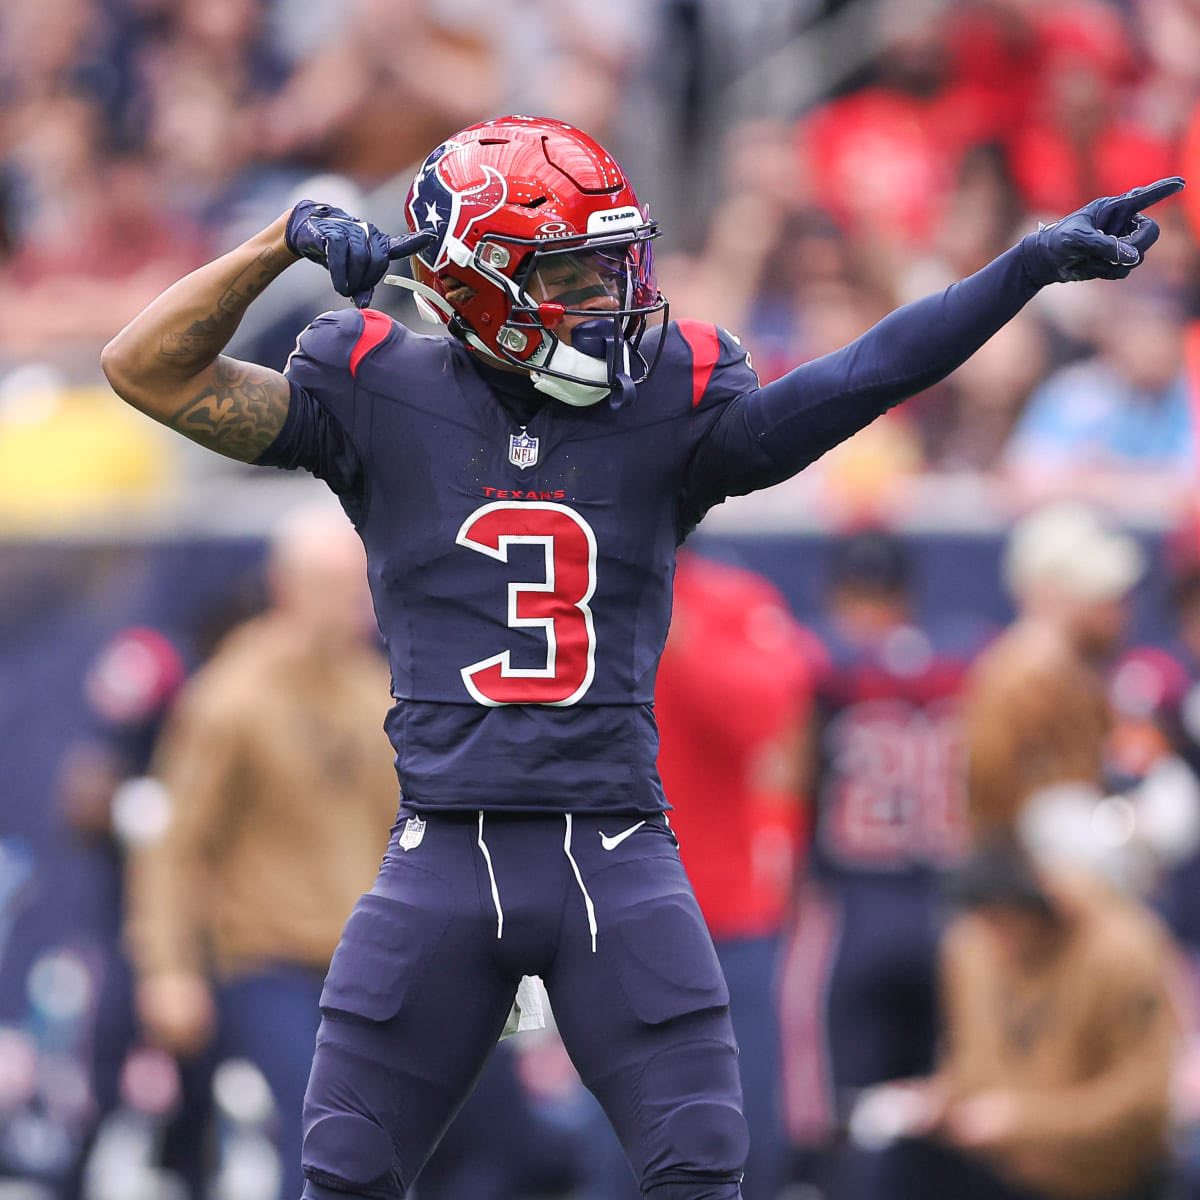 BREAKING: #Texans WR Tank Dell was shot in Florida at a nightclub as an innocent bystander.

It’s thankfully a minor wound and he will make a full recovery.